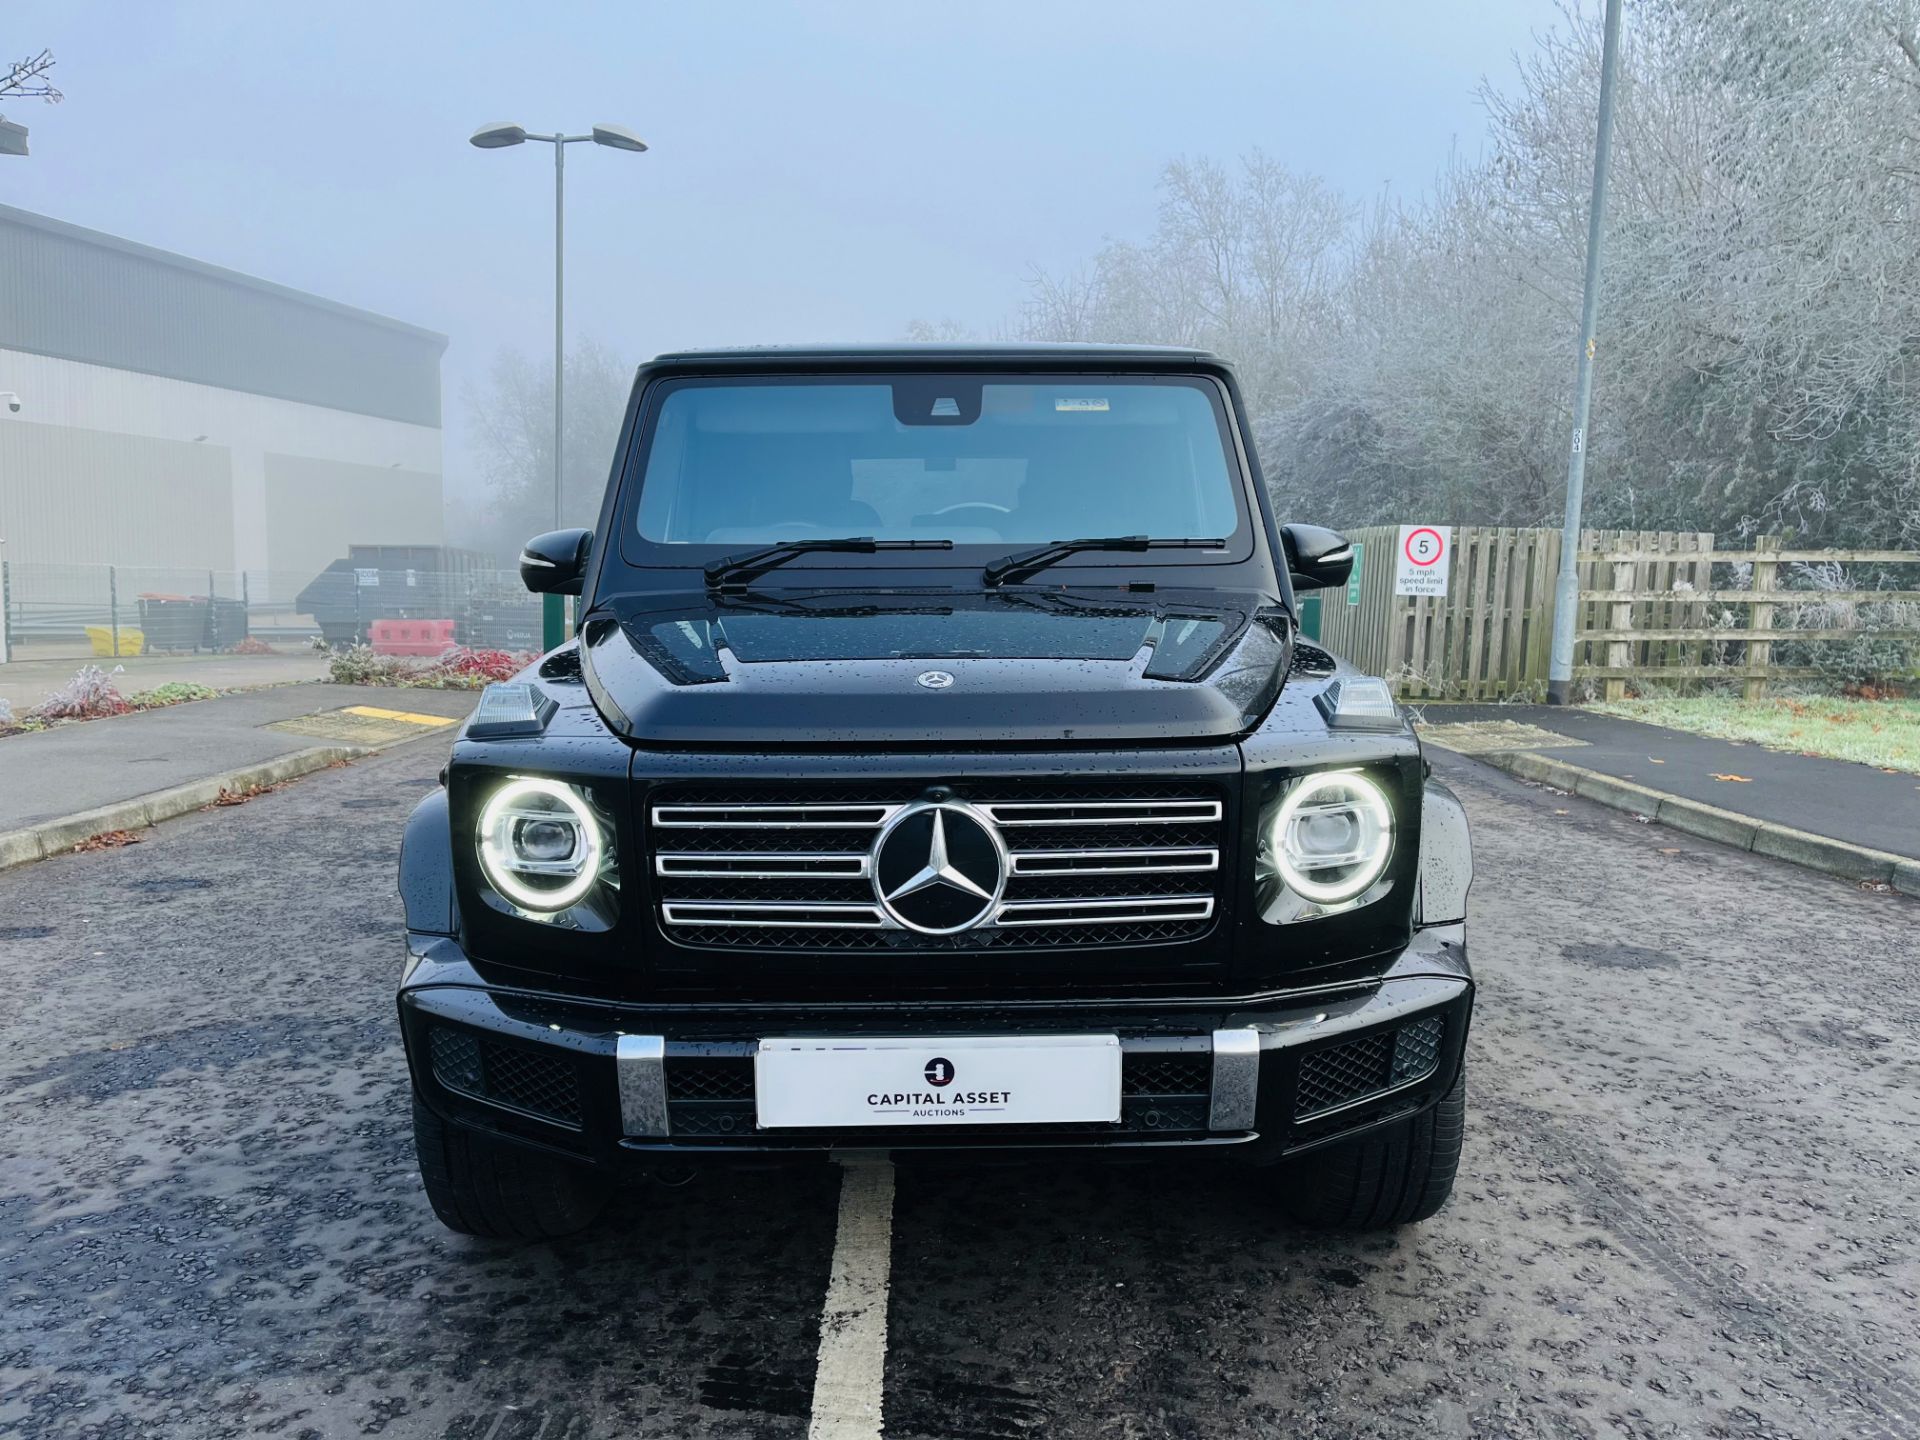 MERCEDES G400d AMG-LINE PREMIUM PLUS (72 REG) 1 OWNER WITH ONLY 9500 MILES - GREAT SPEC - Image 4 of 45